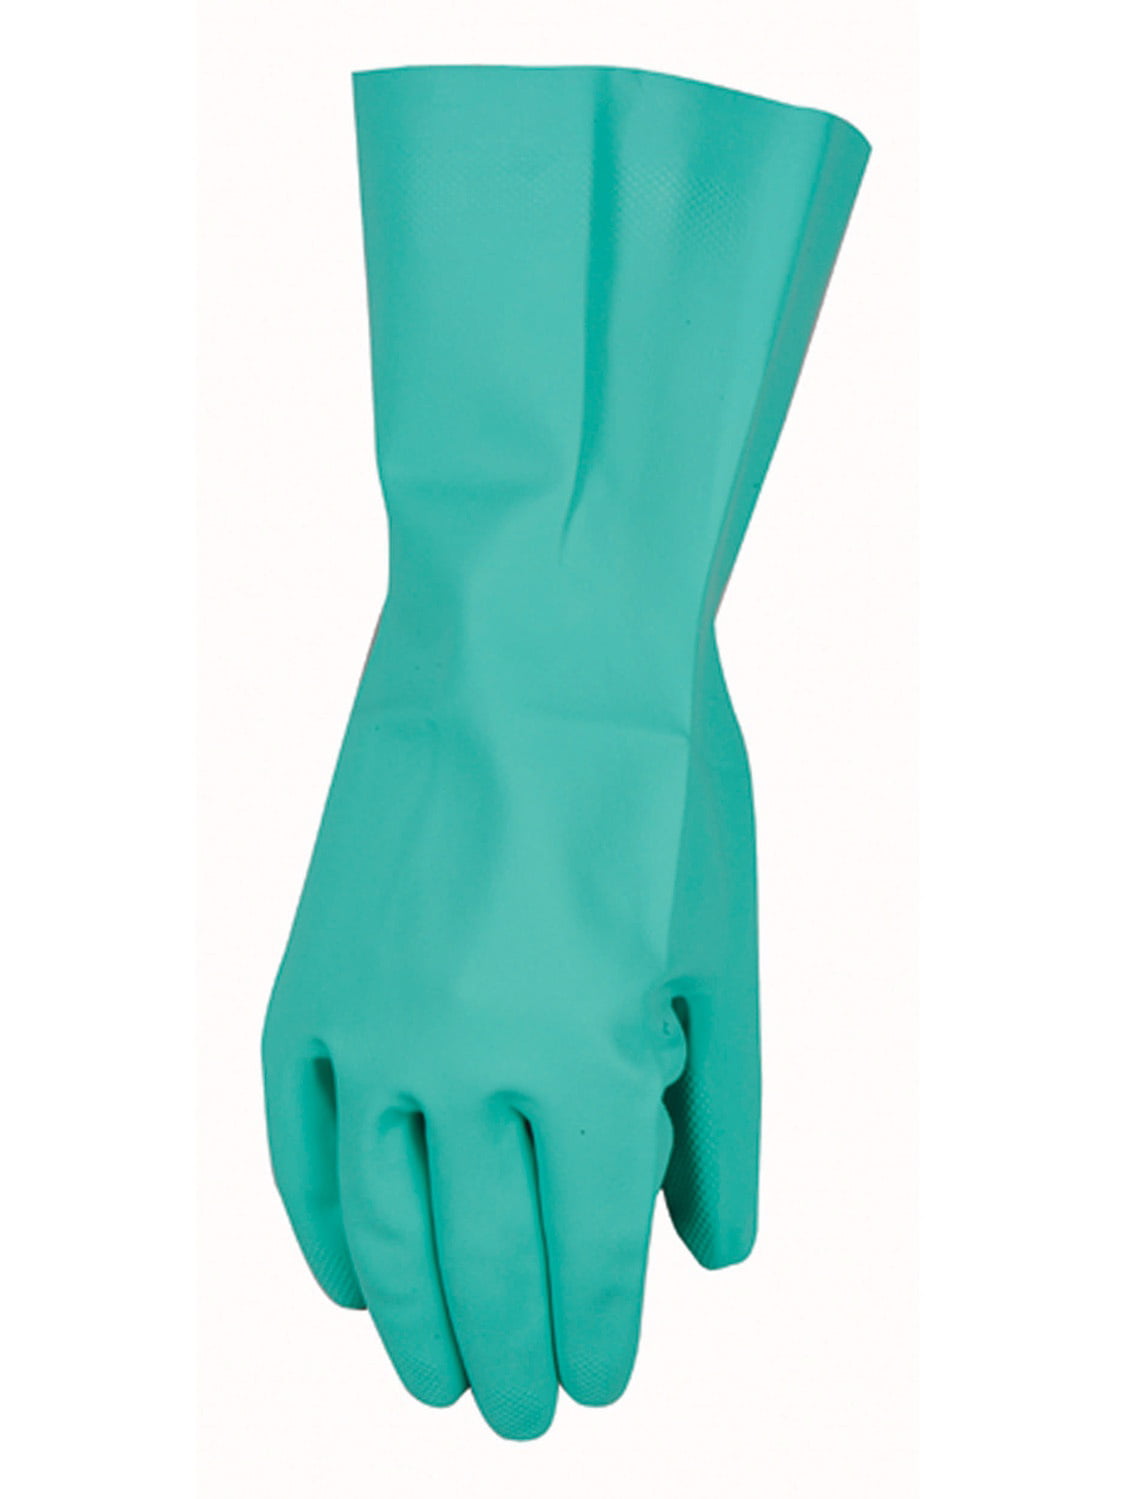 1PR FASTCAP CHEMICAL RESISTANT GLOVES NON-LATEX FLOCK LINED MRSF18T 